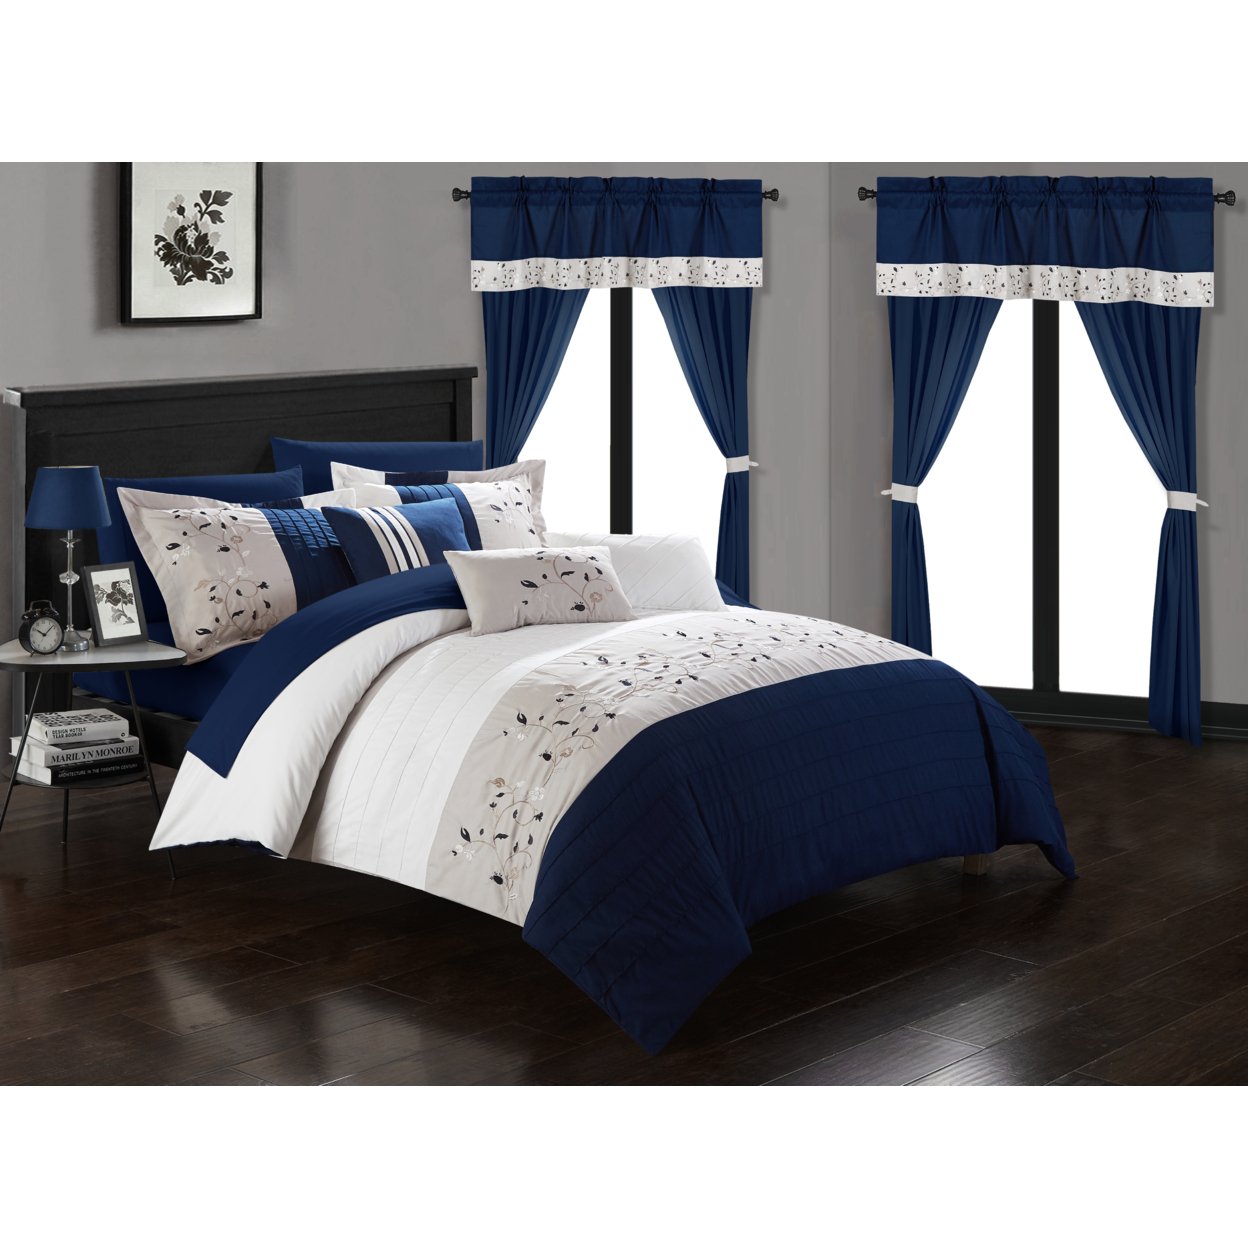 Sonita 20-Piece Bedding Set With Comforter, Sheets & Curtains, Mult. Colors - Navy, Queen